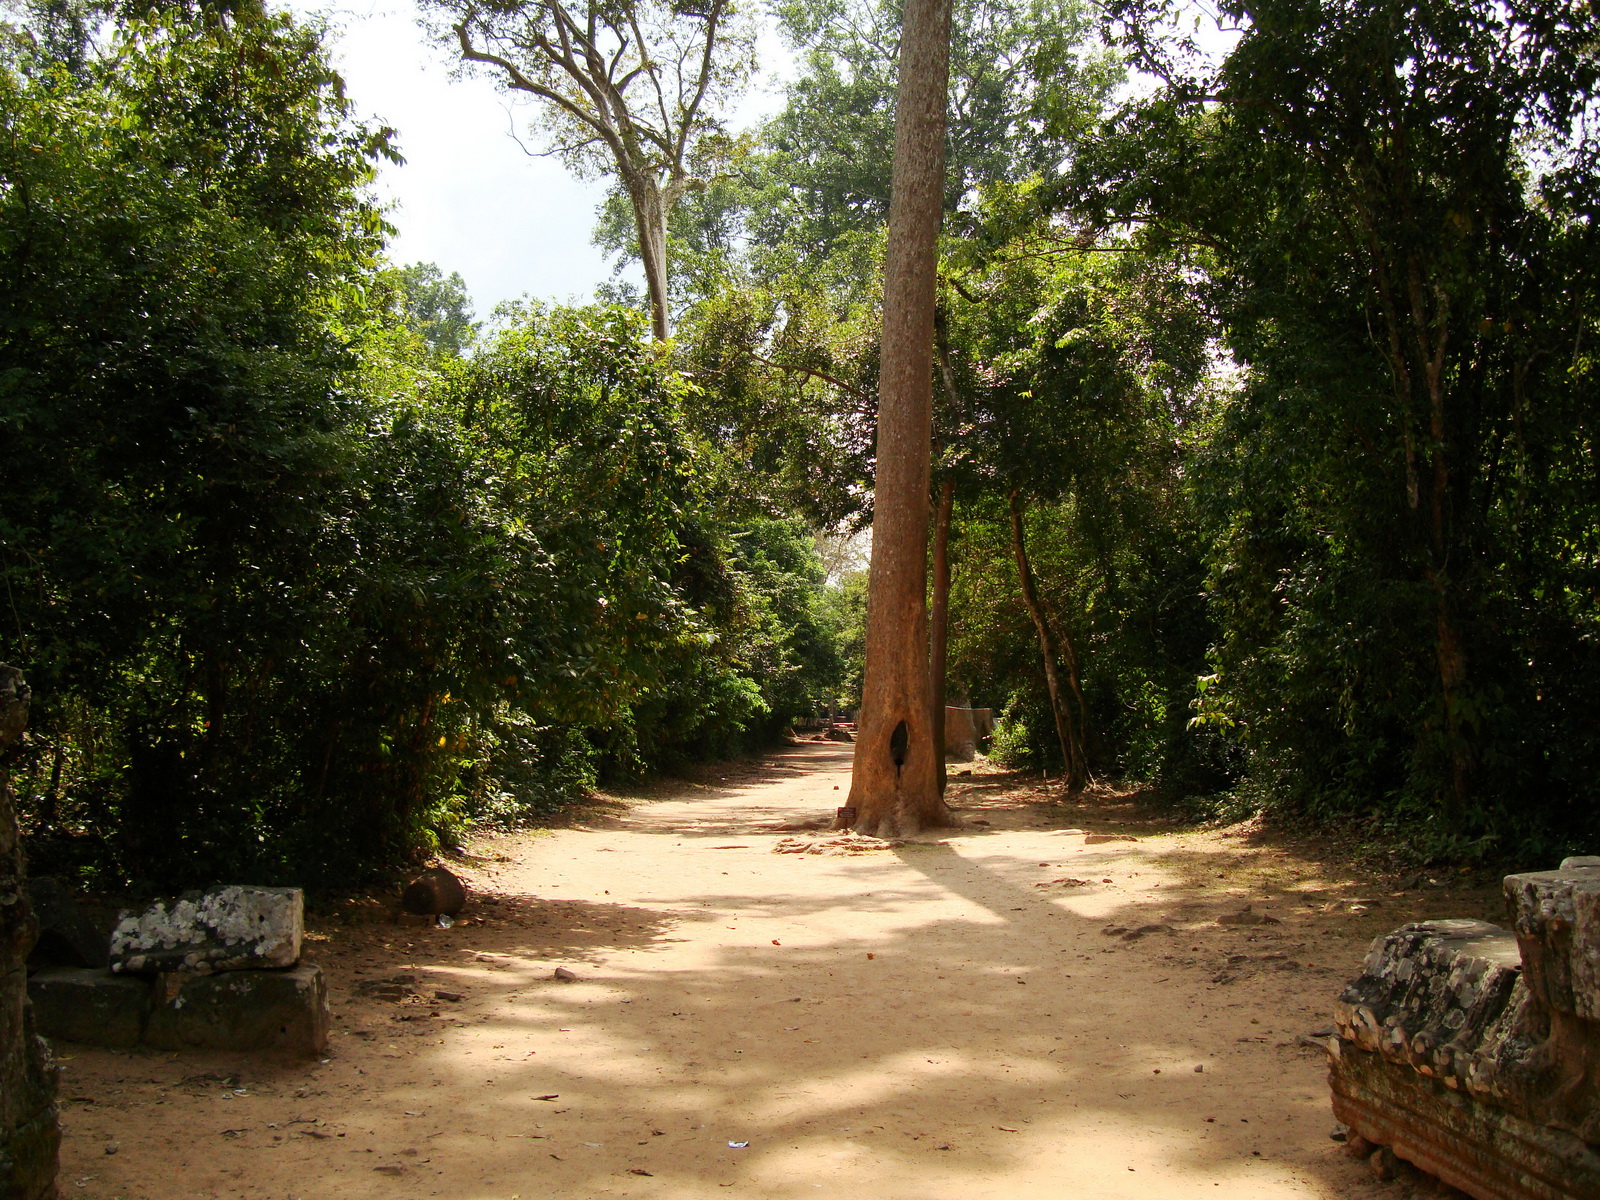 Preah Khan Temple giant tree along the pathway Angkor Thom 02